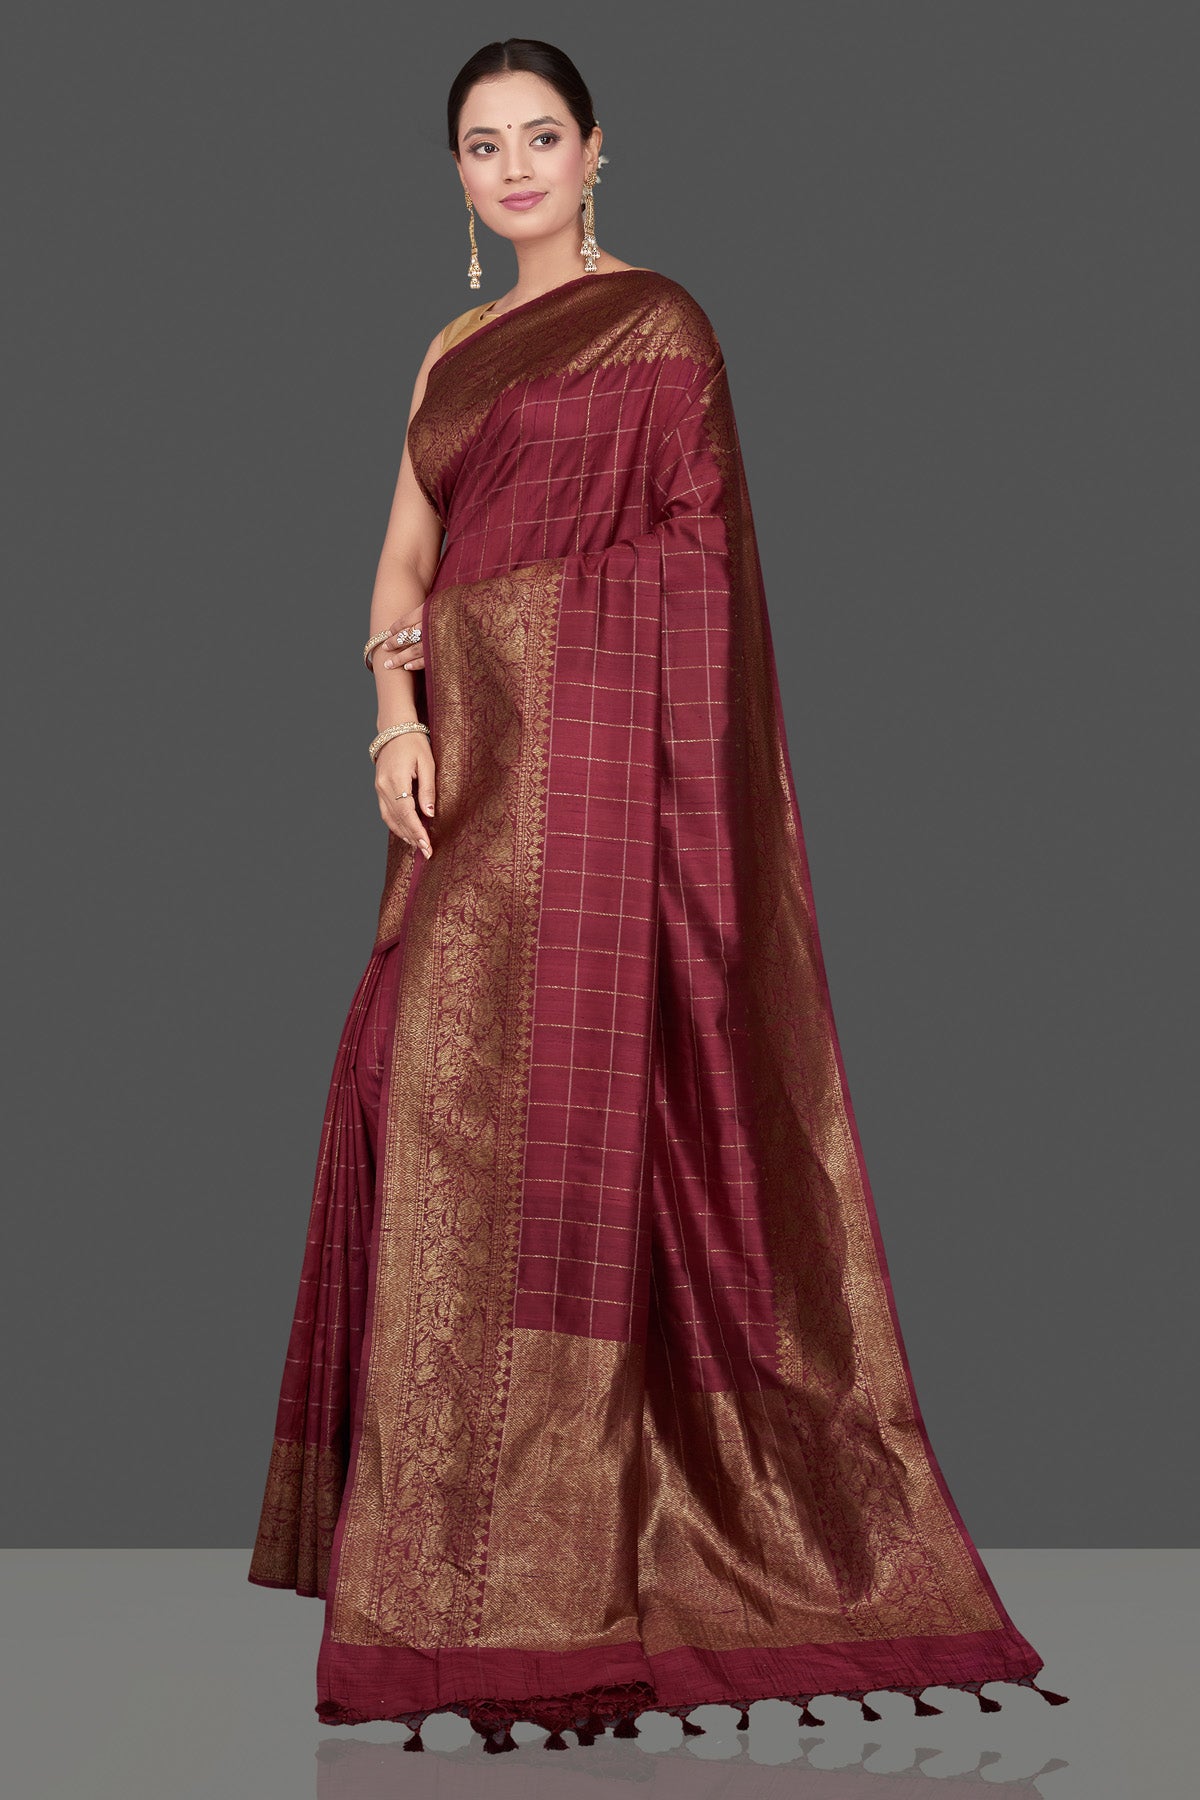 Buy gorgeous plum check tussar Banarasi saree online in USA with antique zari border. Go for stunning Indian designer sarees, georgette sarees, handwoven saris, embroidered sarees for festive occasions and weddings from Pure Elegance Indian clothing store in USA.-pallu